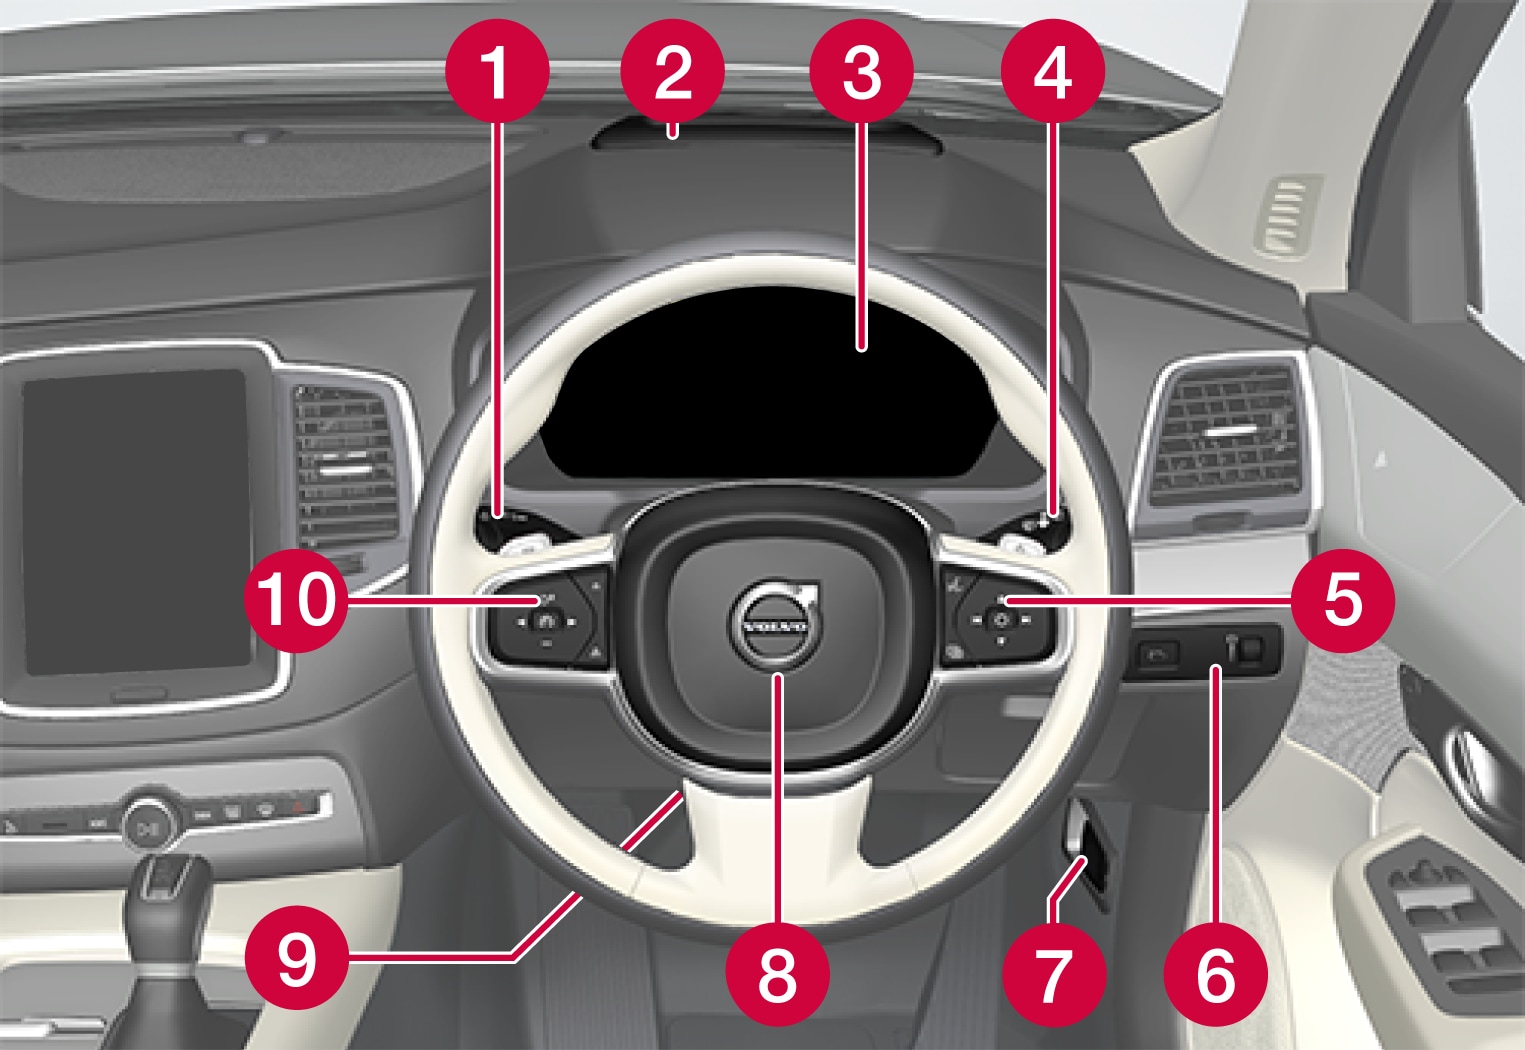 P5-XC90-21w22-Displays and controls, right hand drive